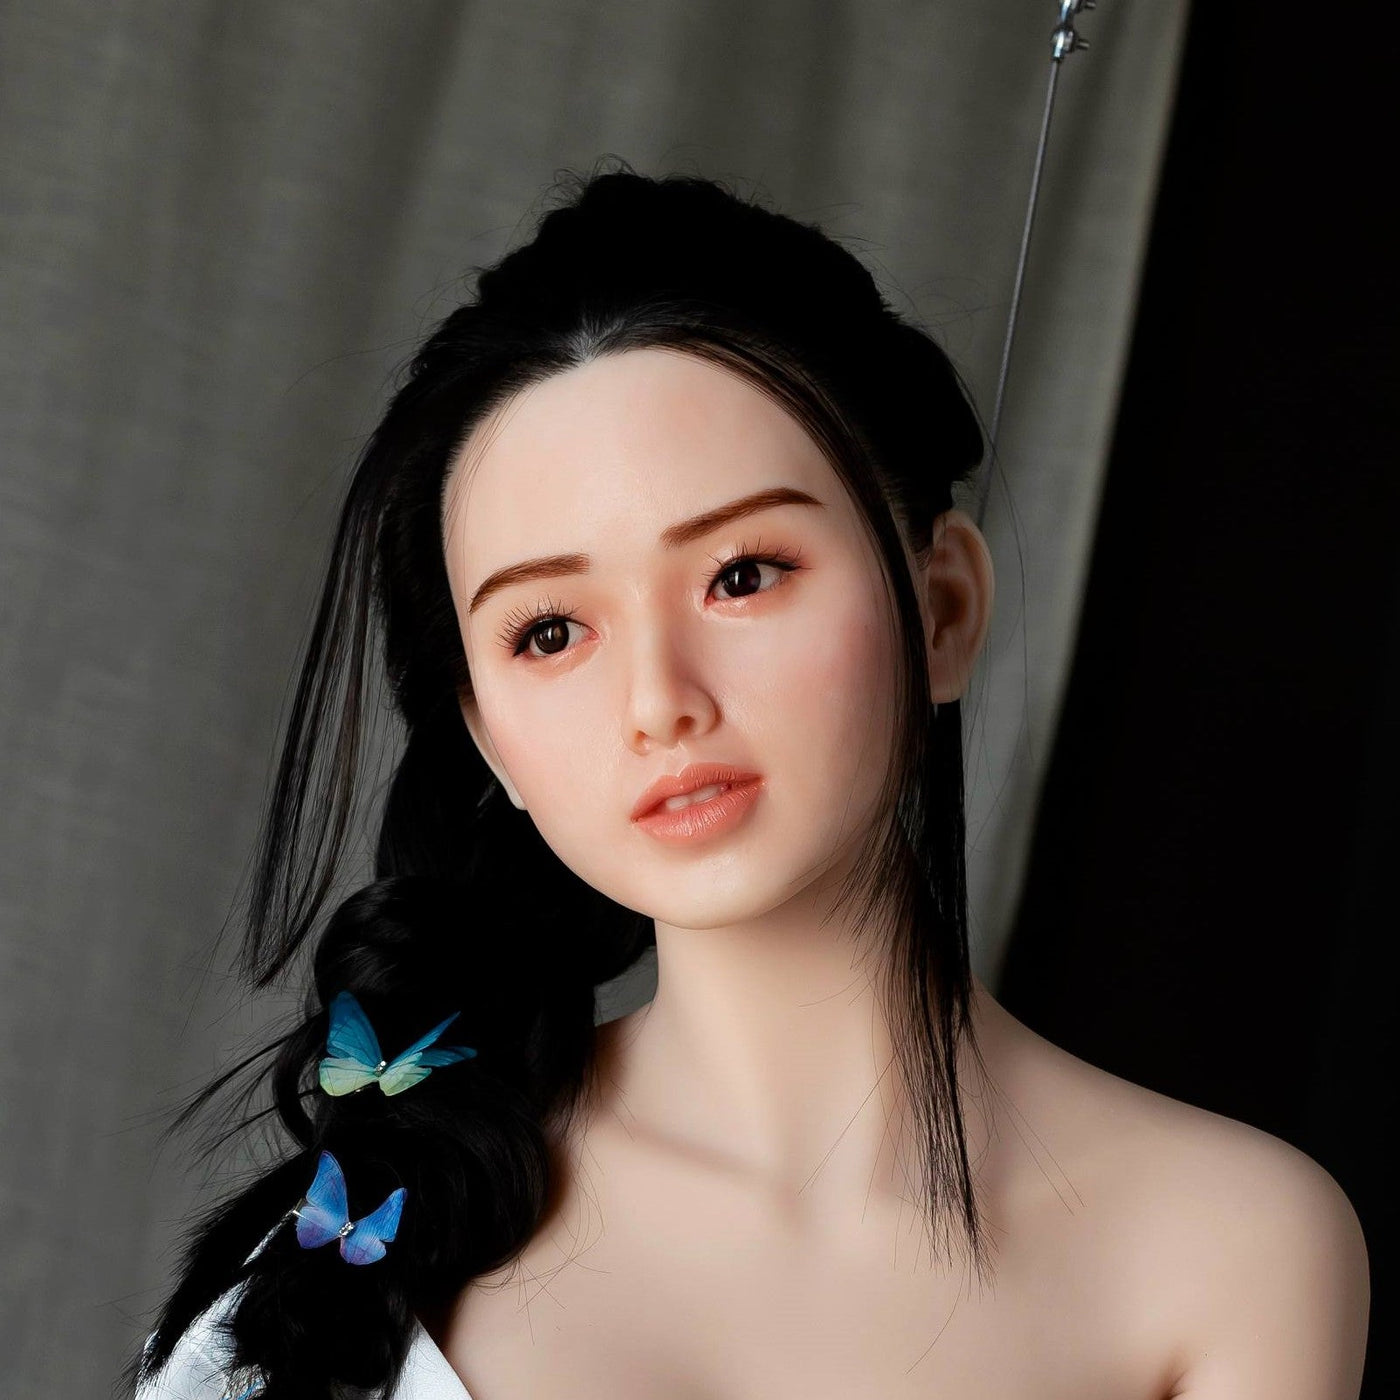 Neodoll Girlfriend Layla - Sex Doll Silicone Head - M16 Compatible - Natural